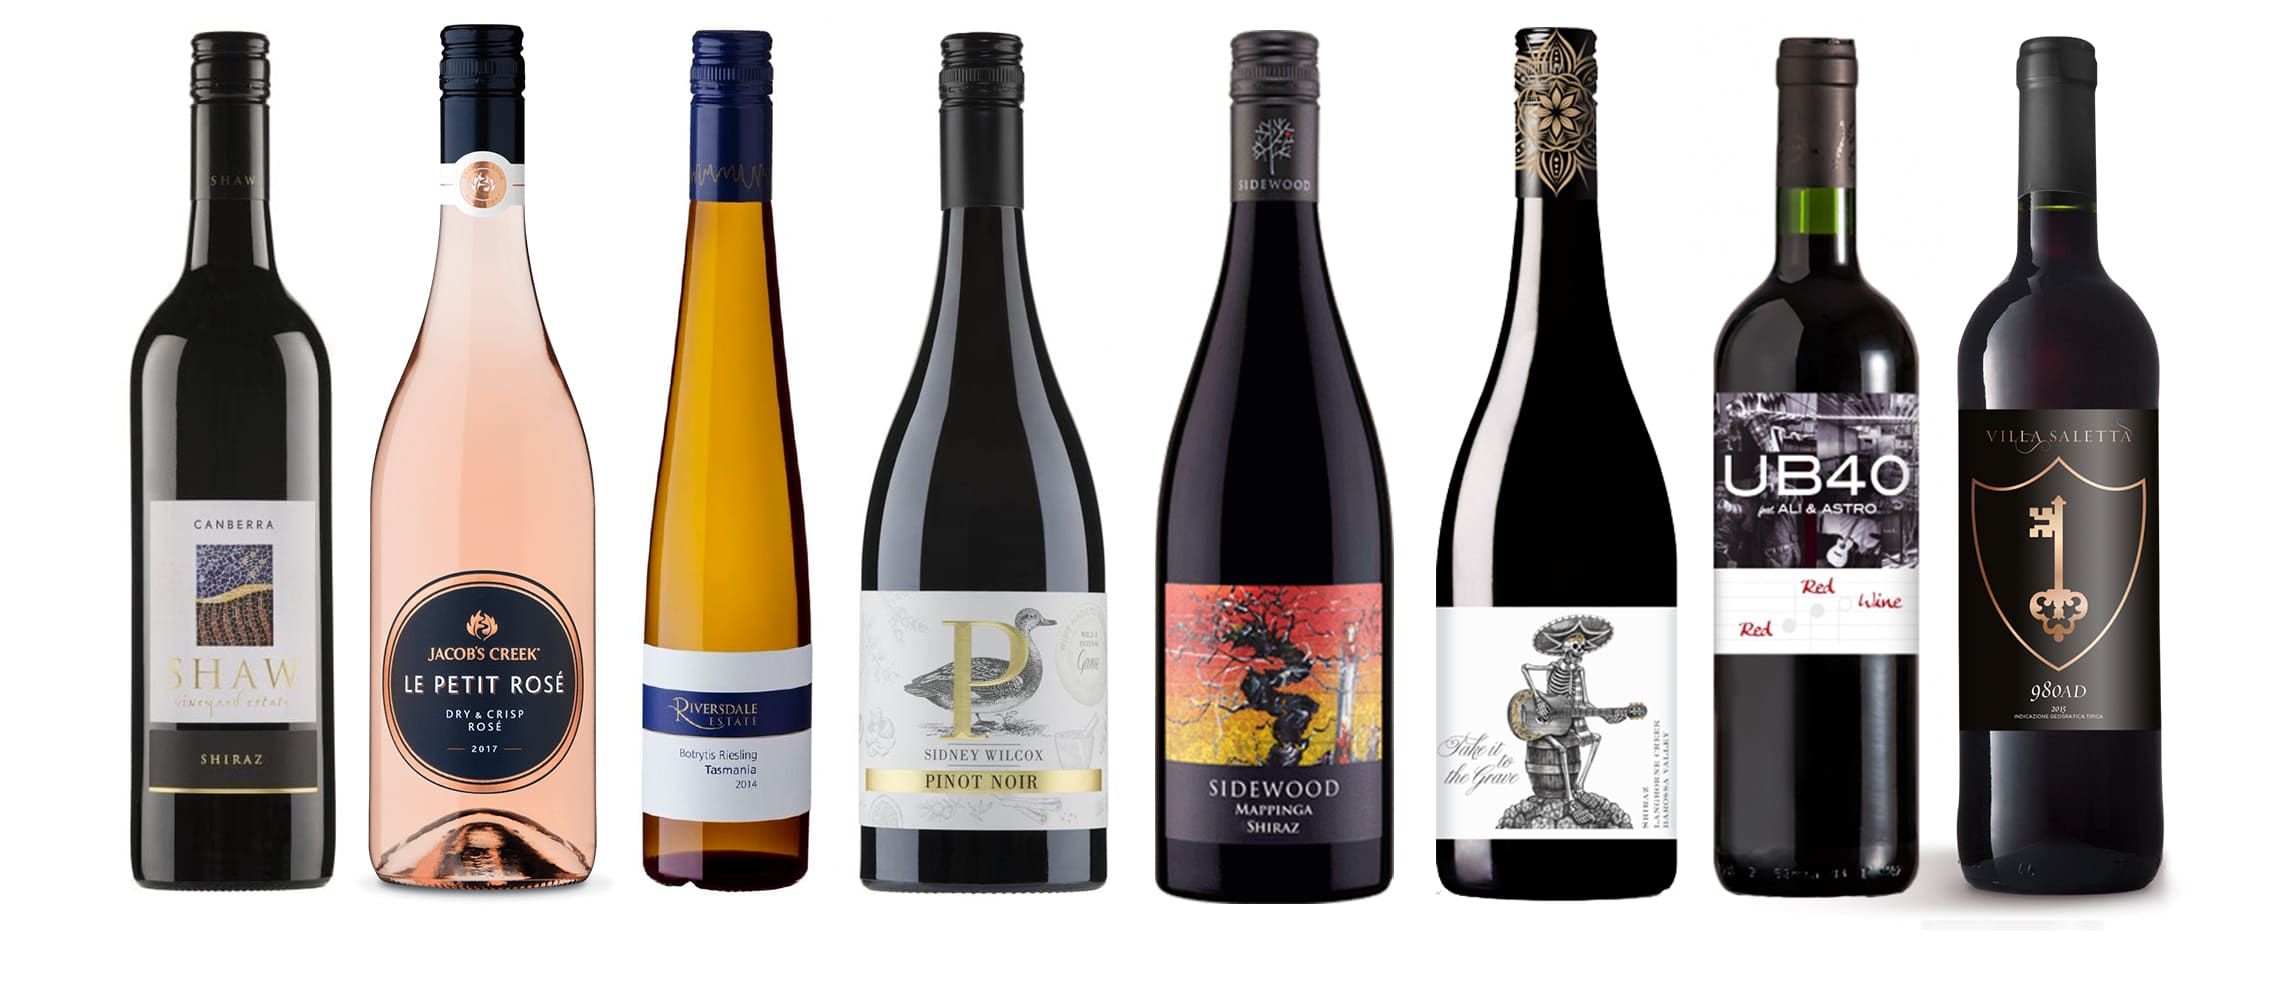 Photo for: Top 10 Wines to Try in 2020